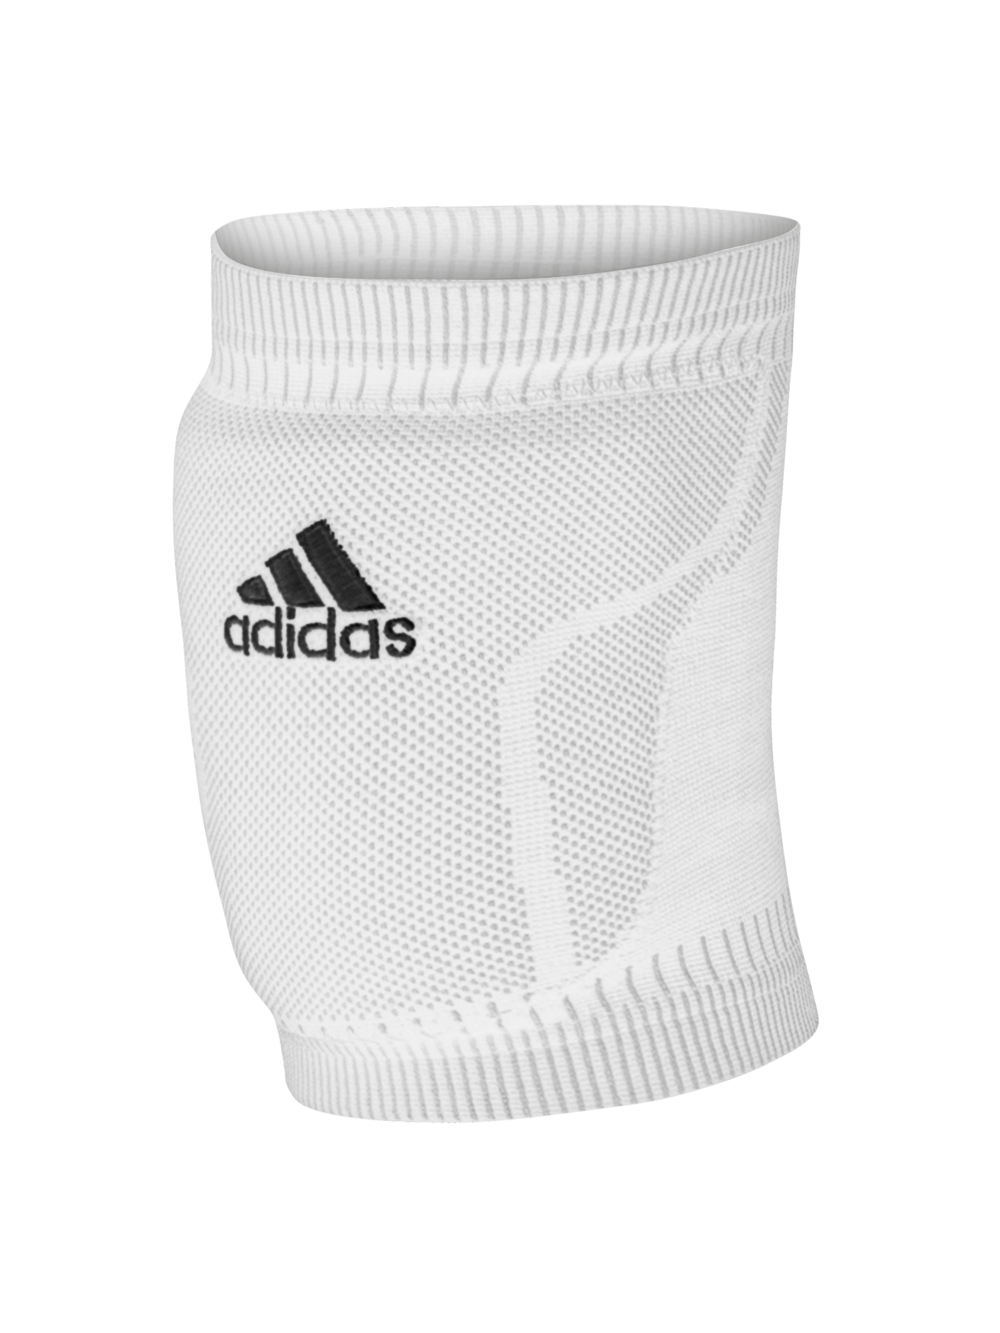 white adidas knee pads volleyball